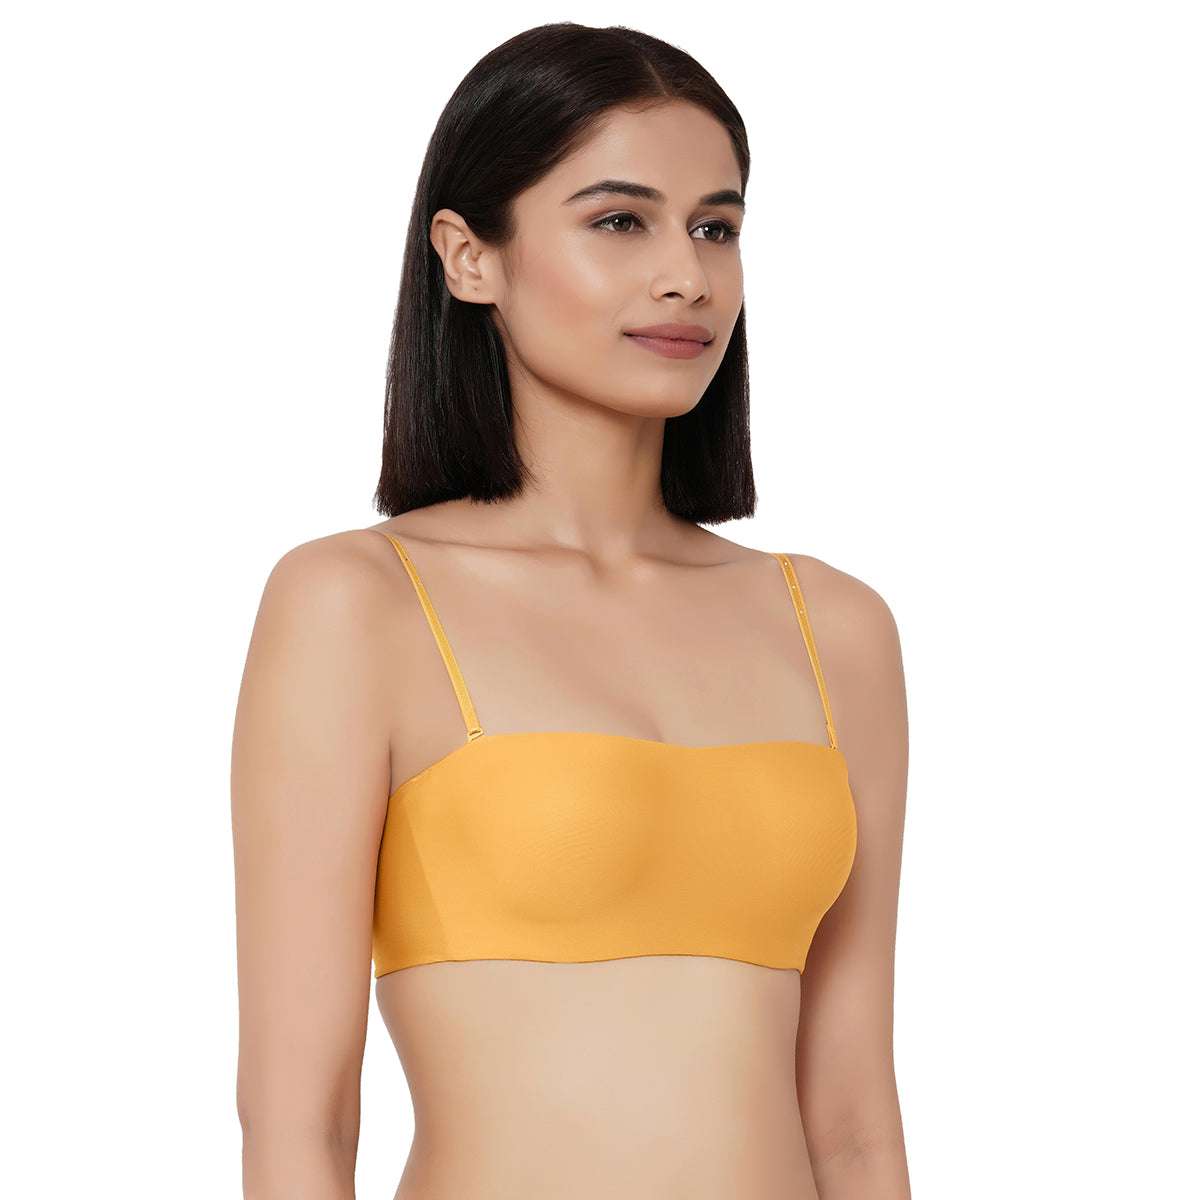 Buy Basic Mold Padded Wired Half Cup Strapless Bandeau T Shirt Bra